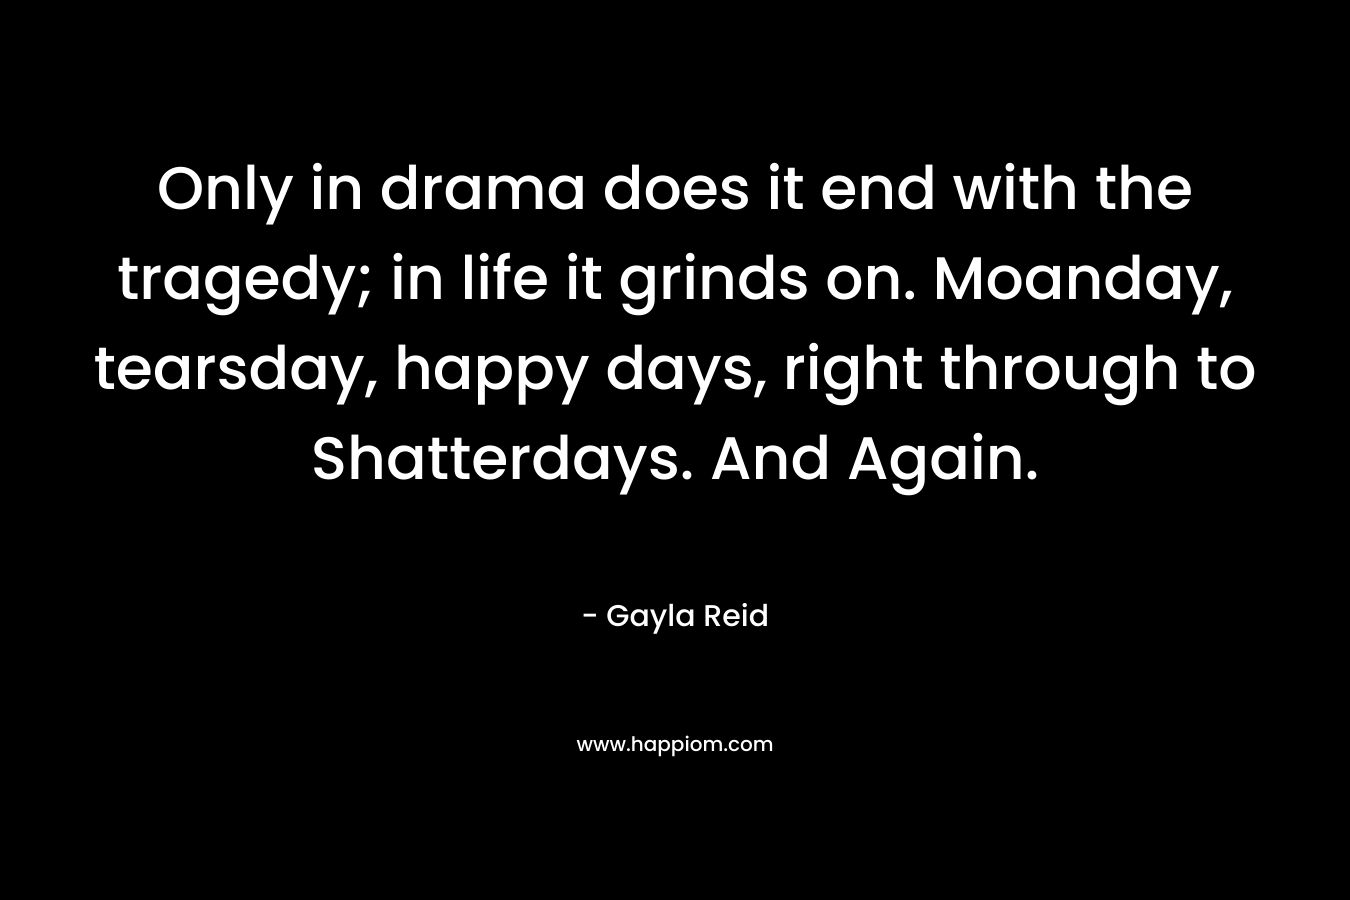 Only in drama does it end with the tragedy; in life it grinds on. Moanday, tearsday, happy days, right through to Shatterdays. And Again. – Gayla Reid